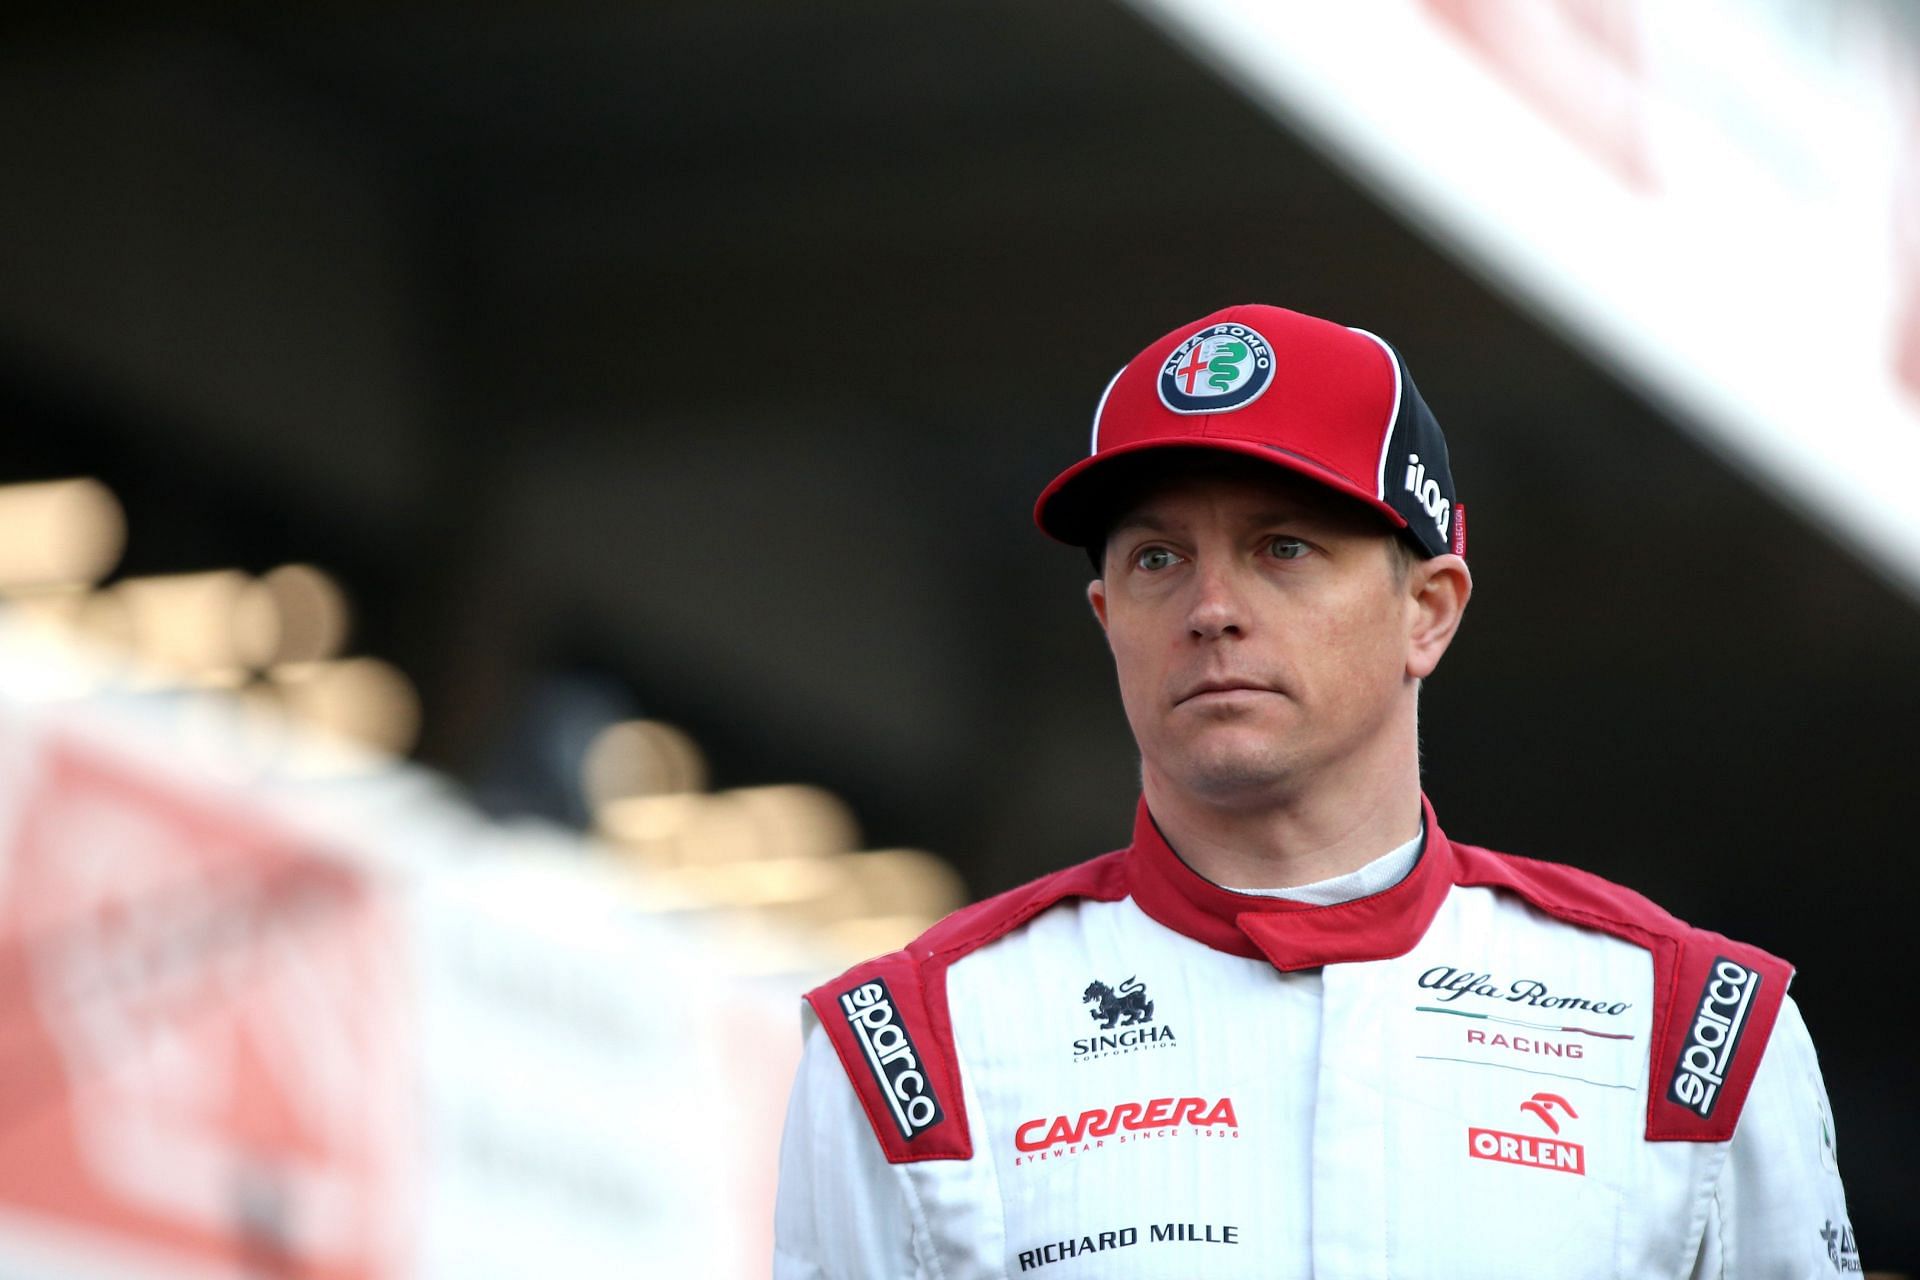 Kimi Raikkonen decided to retire from F1 at the end of the 2021 season